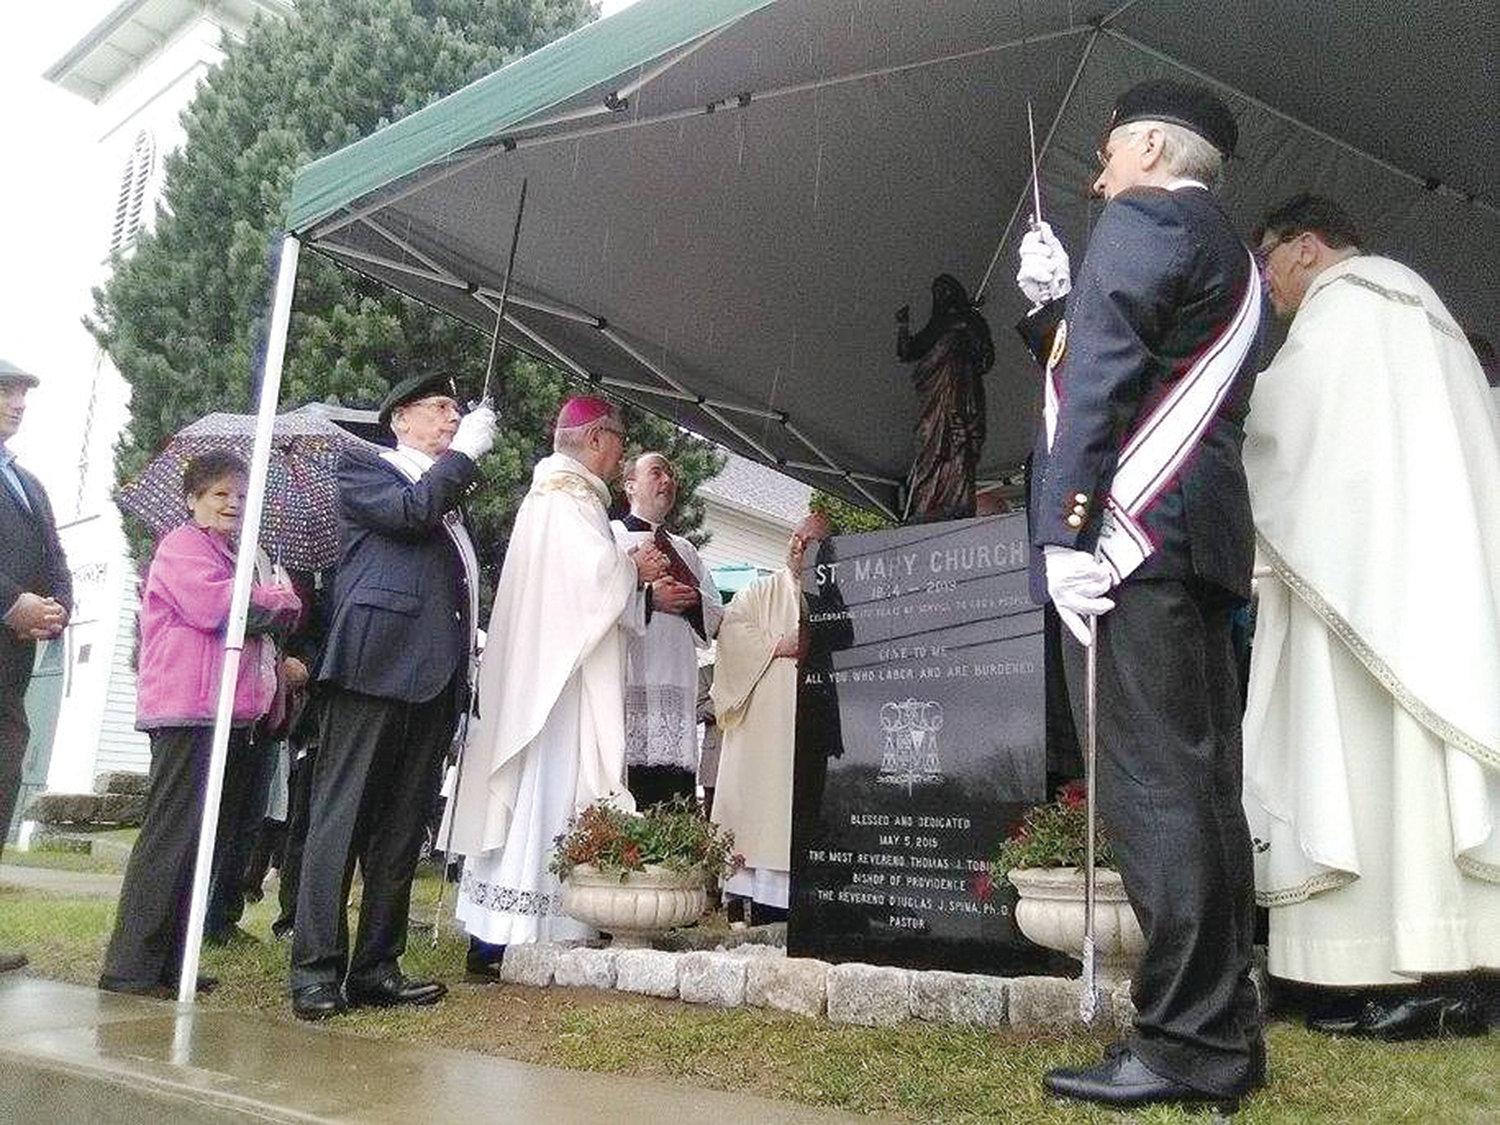 Bishop Tobin blesses and dedicates a new shrine outside the church to the Sacred Heart of Jesus.